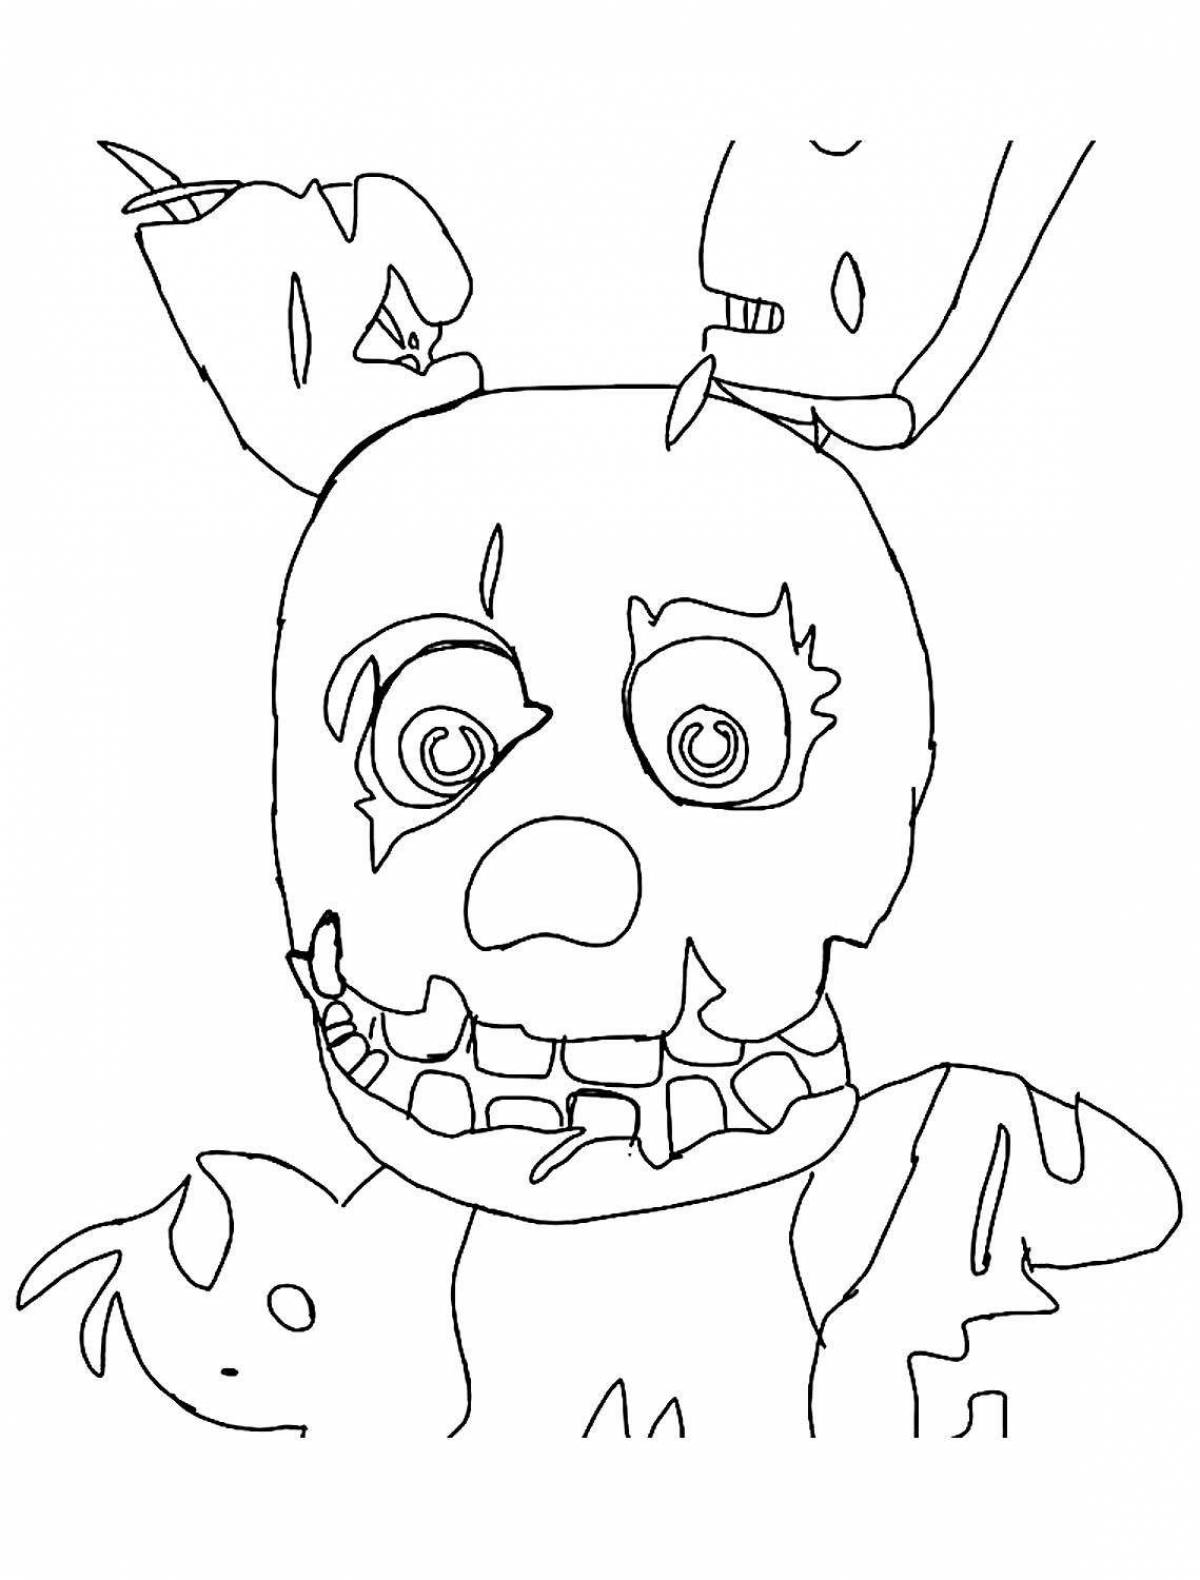 Fnaf2 awesome coloring book